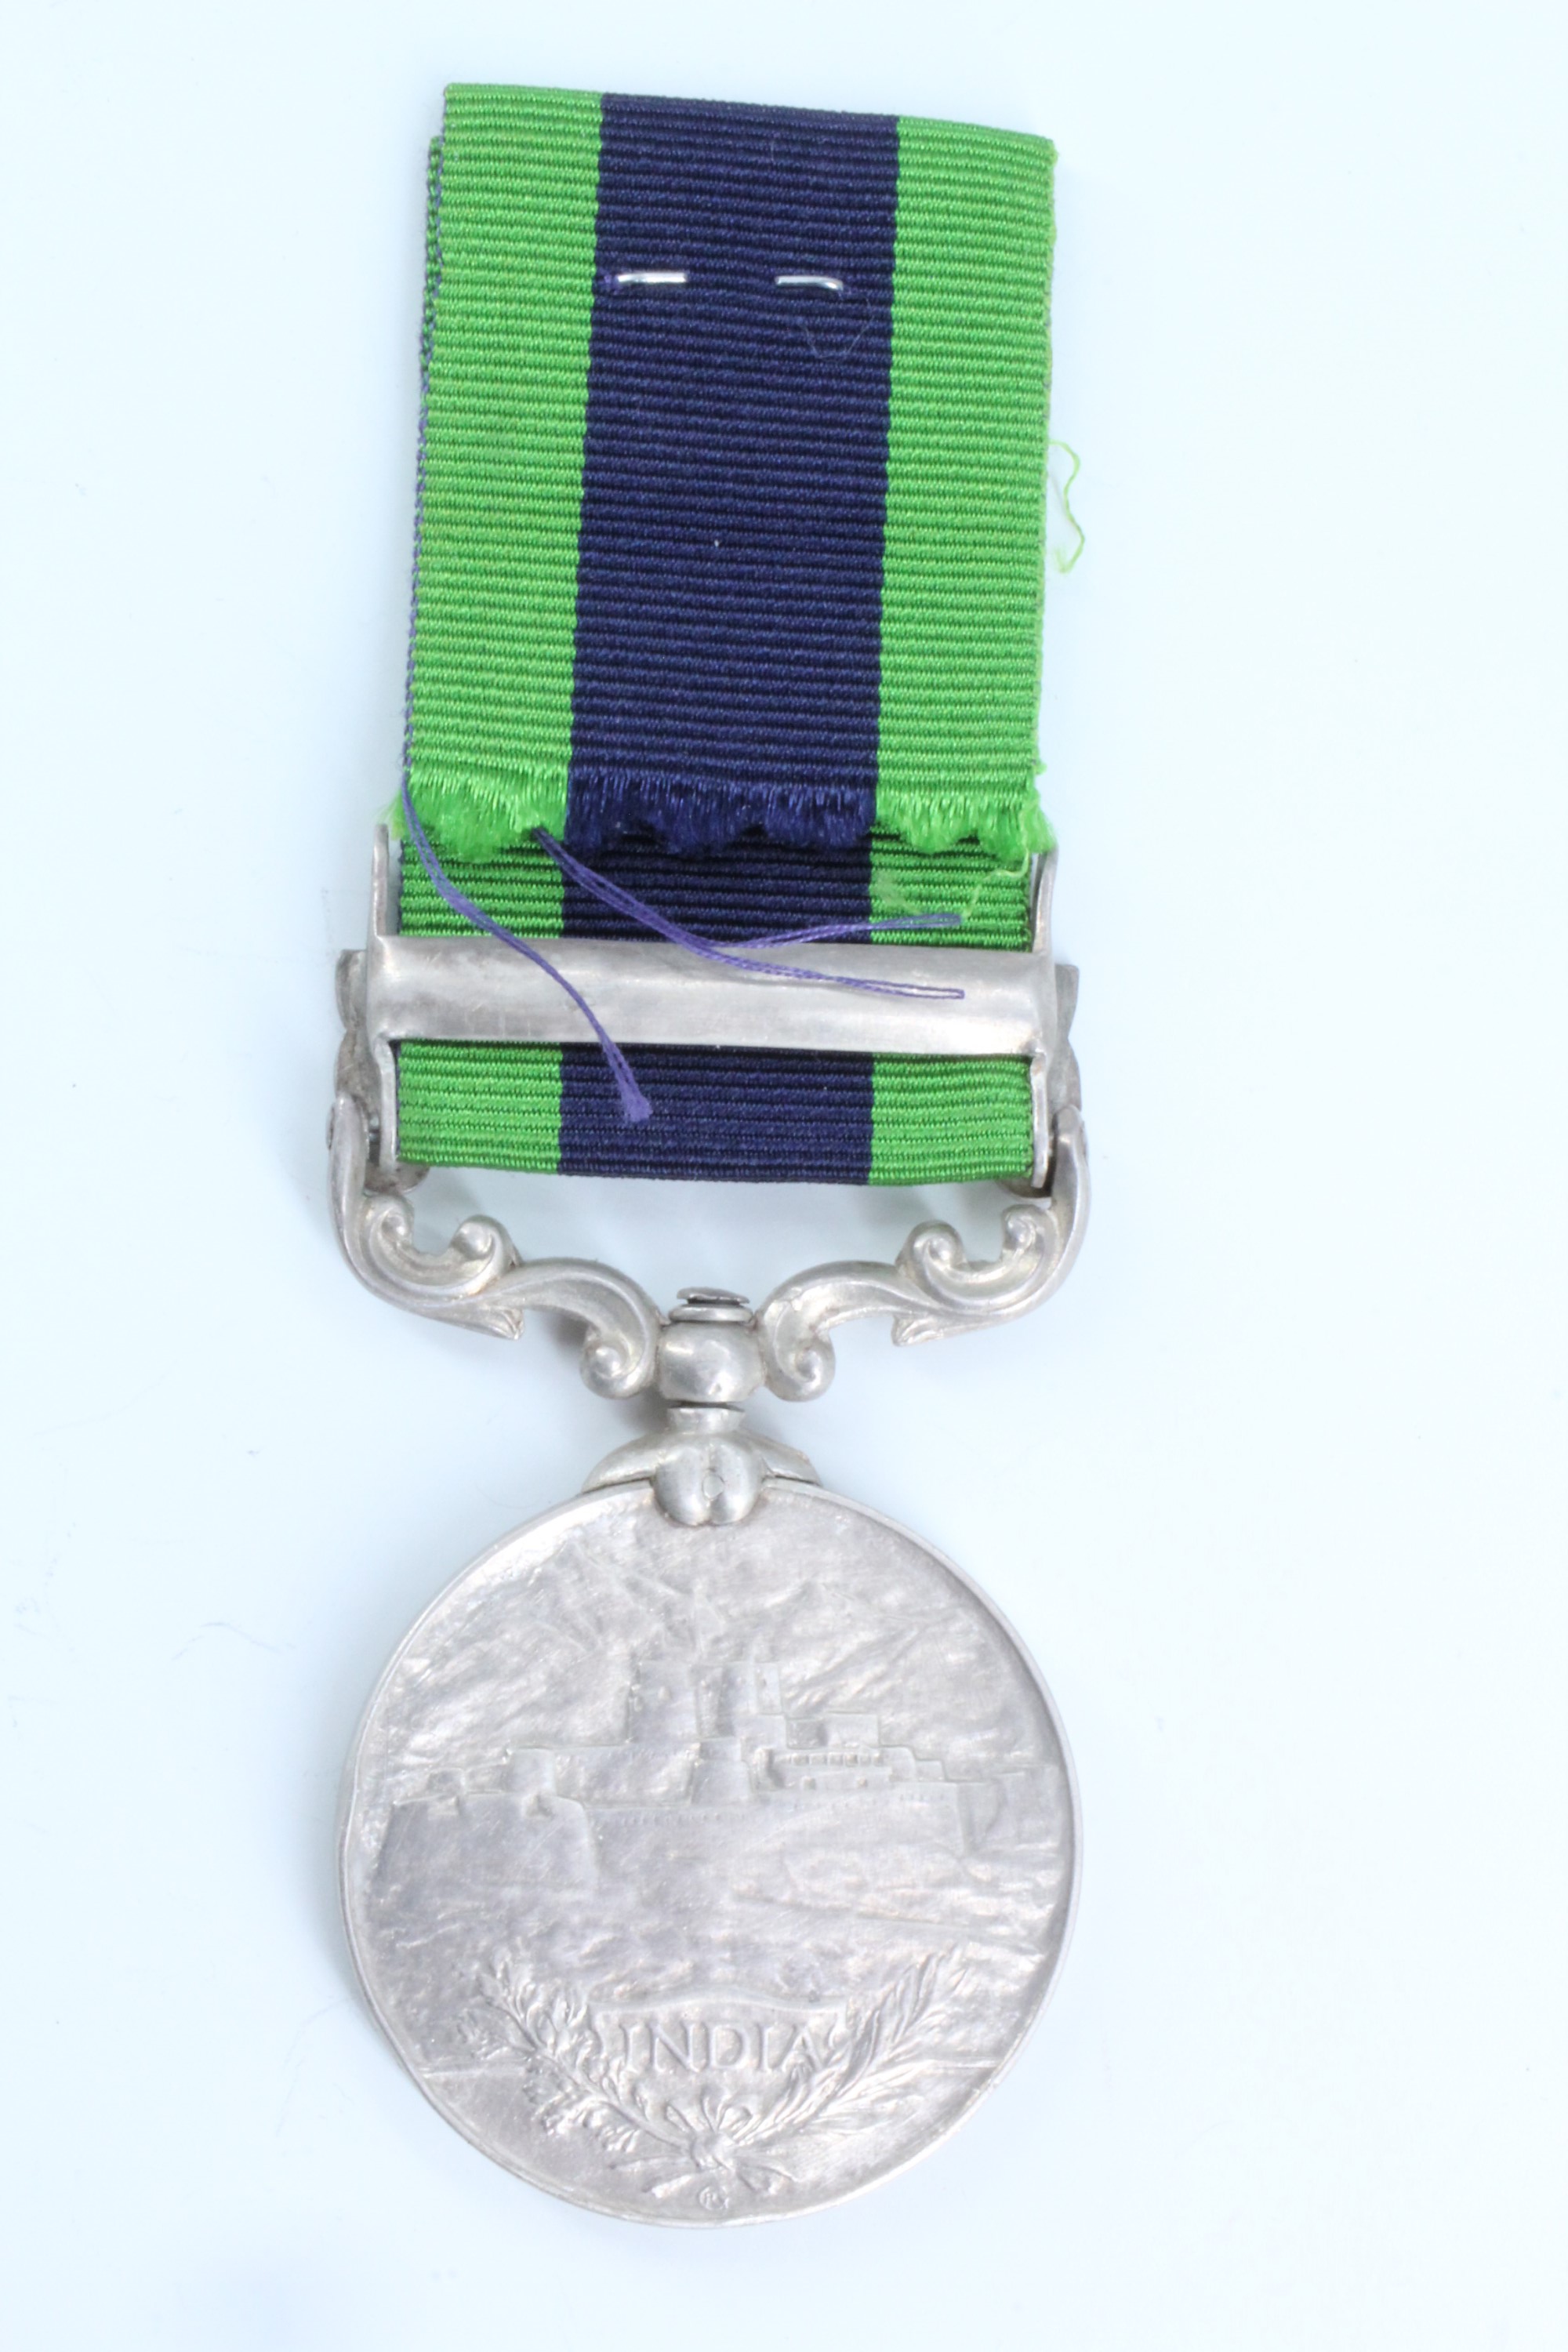 An India General Service Medal with Malabar 1921-22 clasp to 1418444 Gnr W Hunt, Royal Artillery - Image 2 of 4